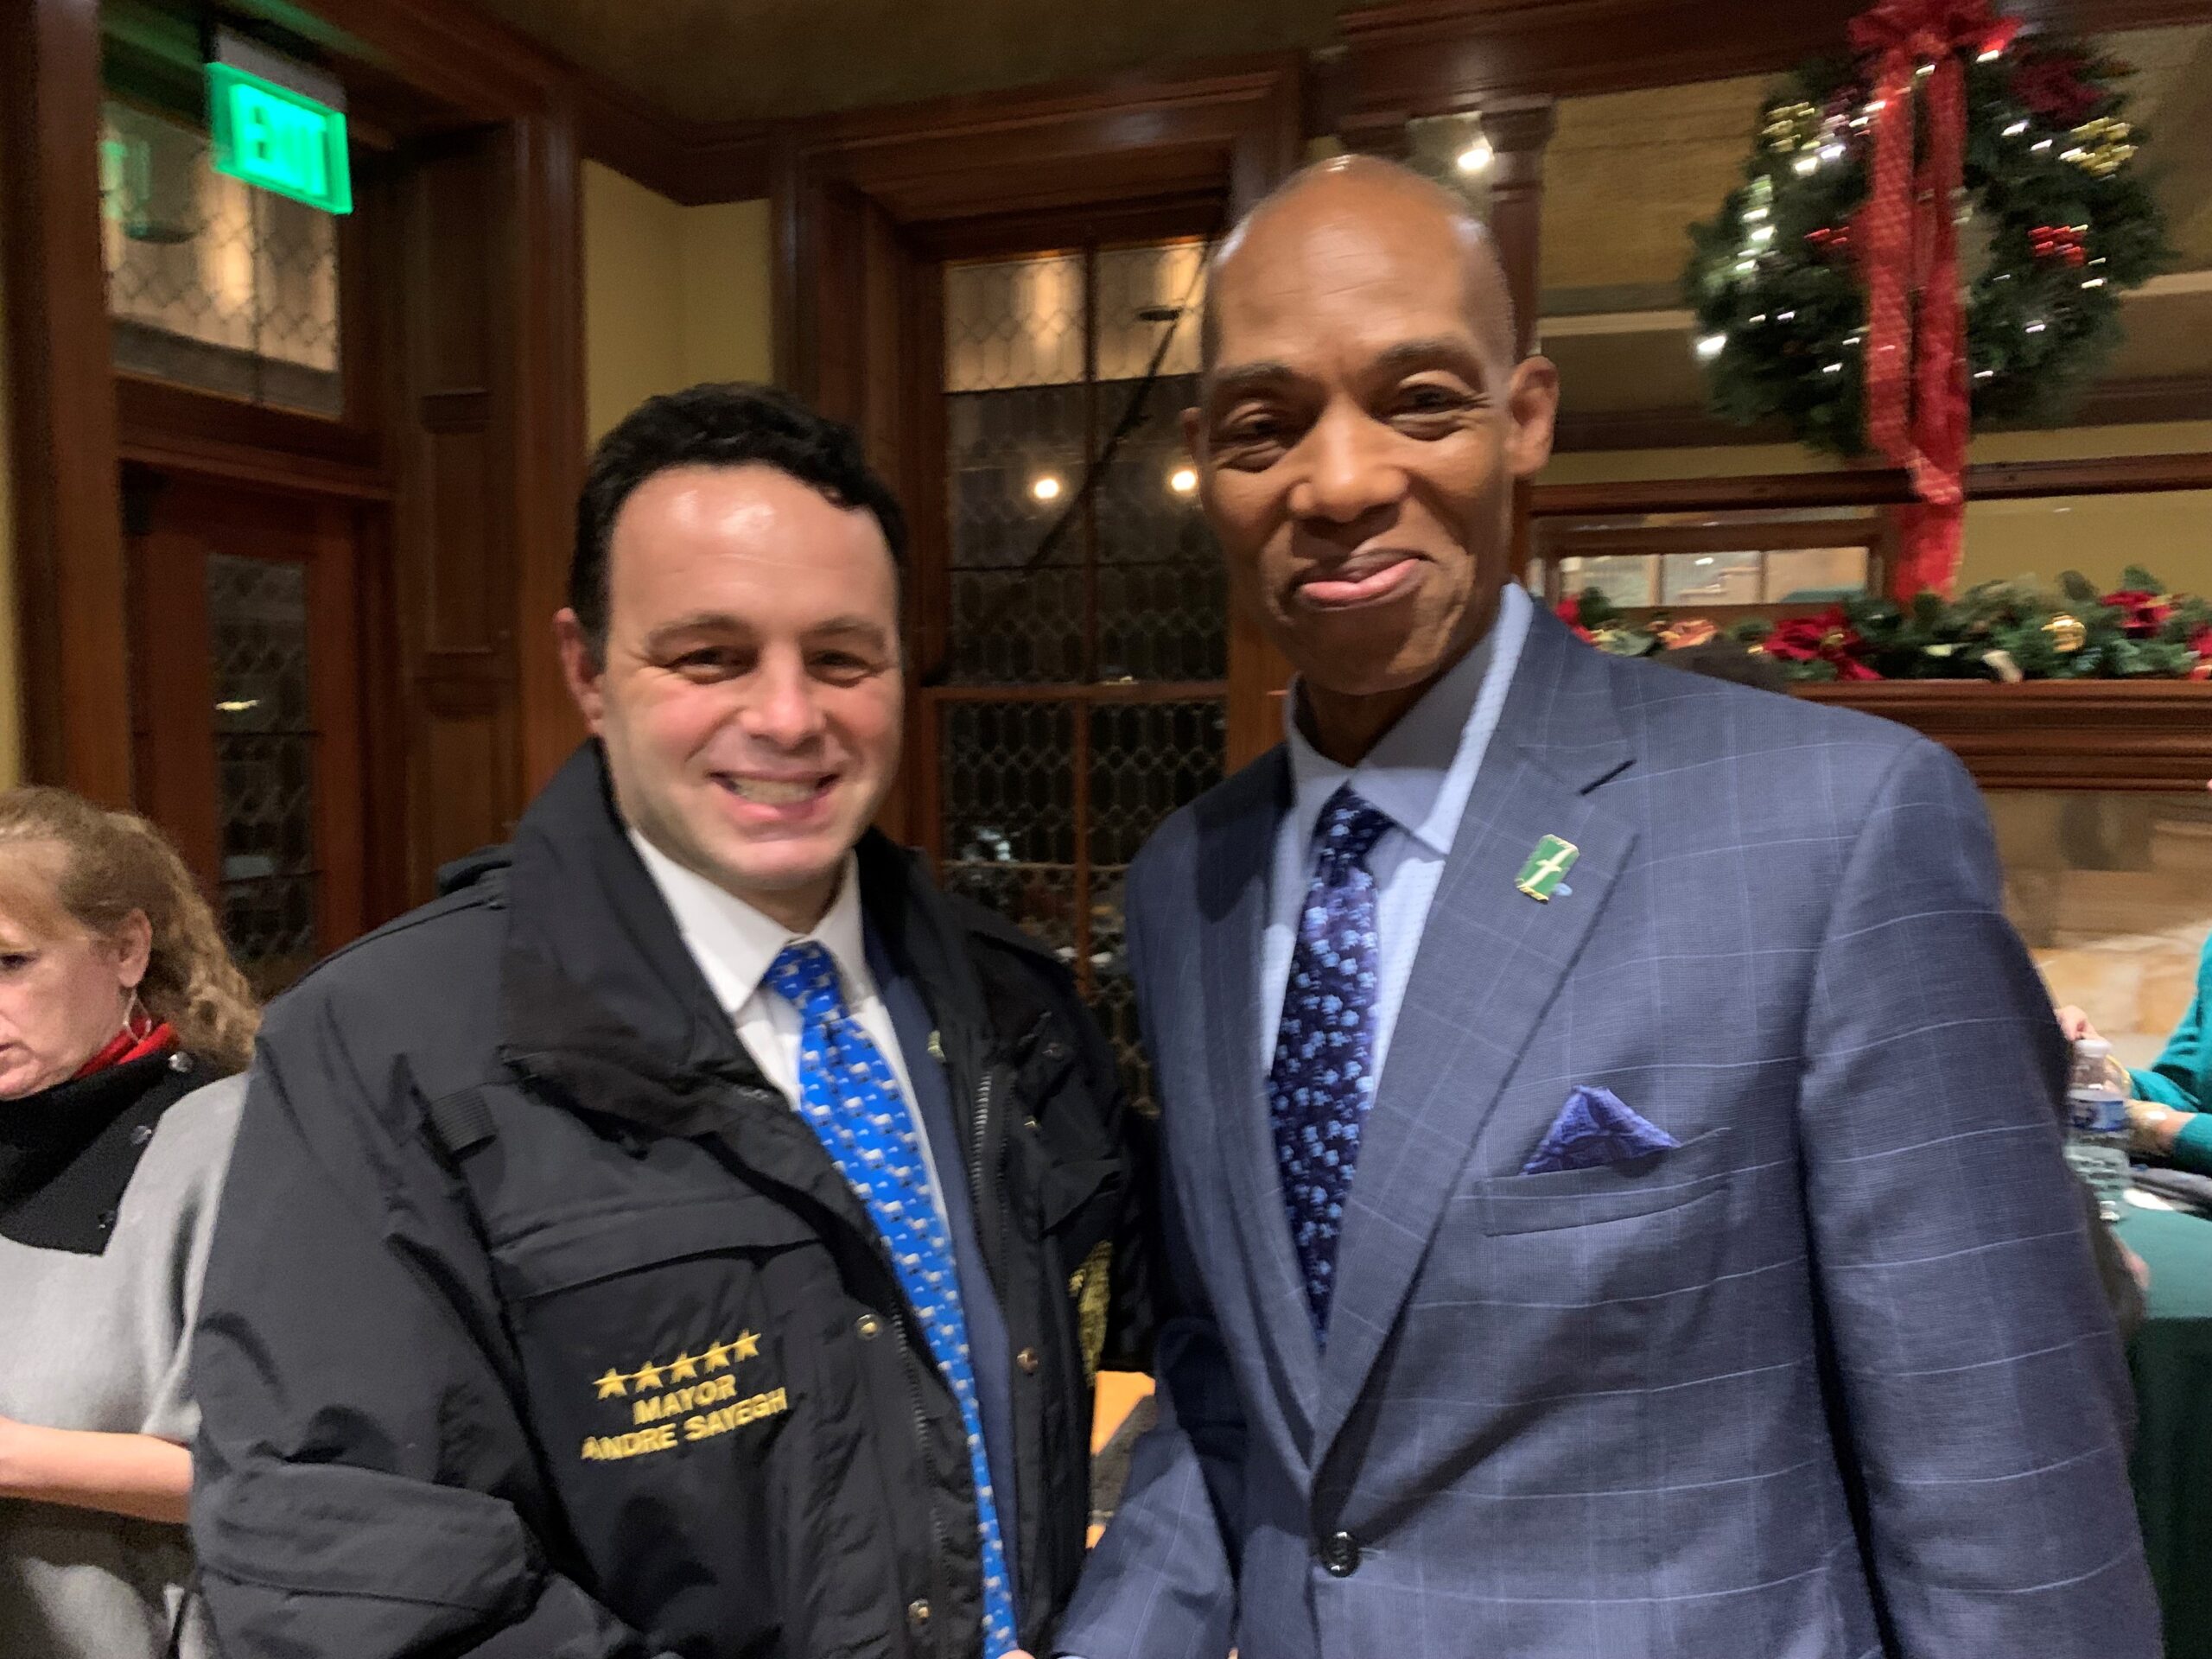 Paterson Mayor Andre Sayegh and Felician University President, James W. Crawford, III